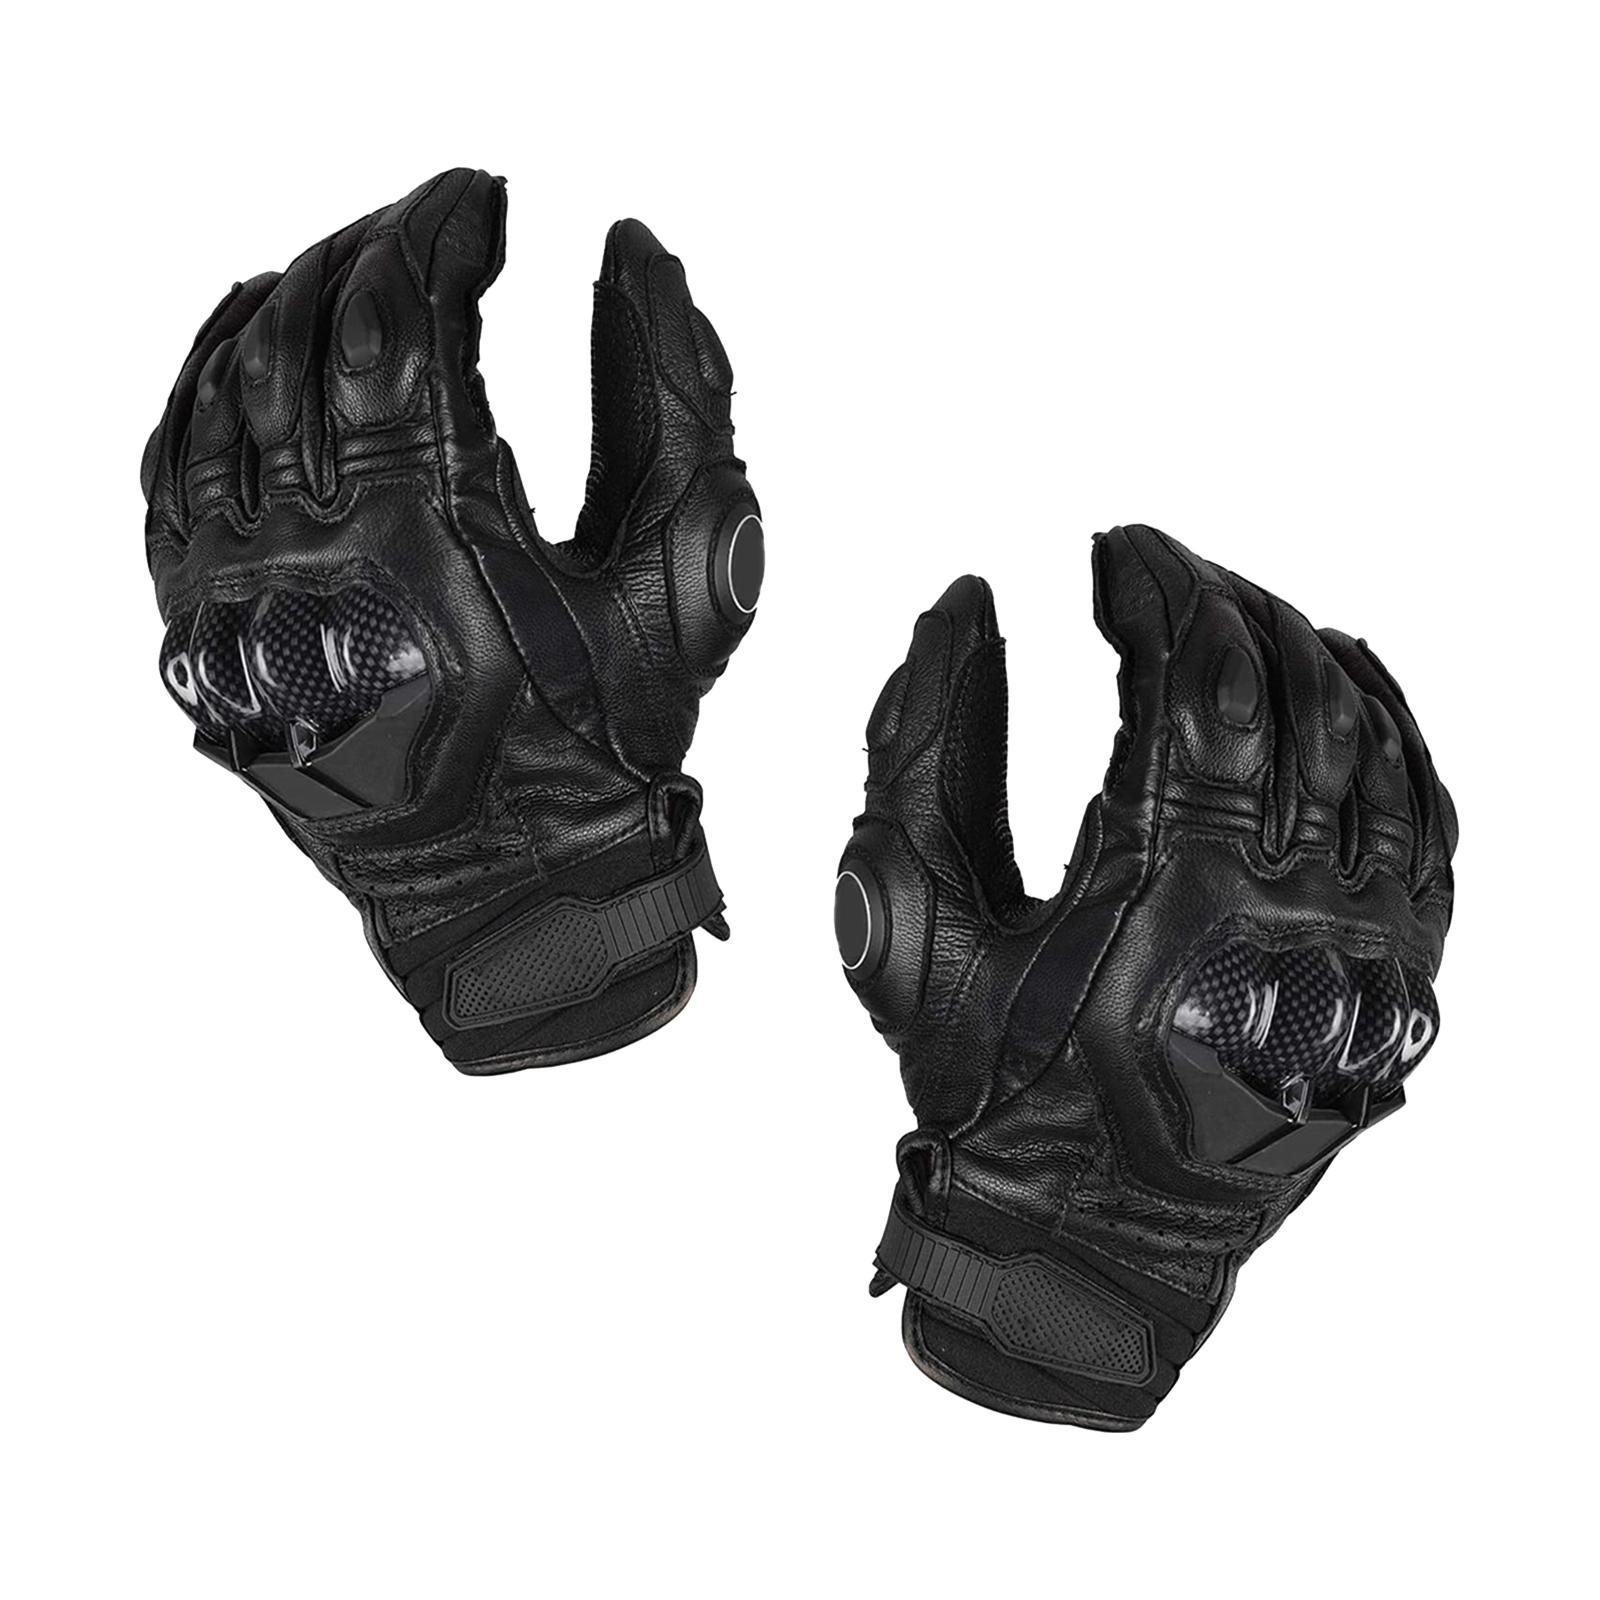 Premium PU Leather Motorcycle Gloves Touchscreen for Driving